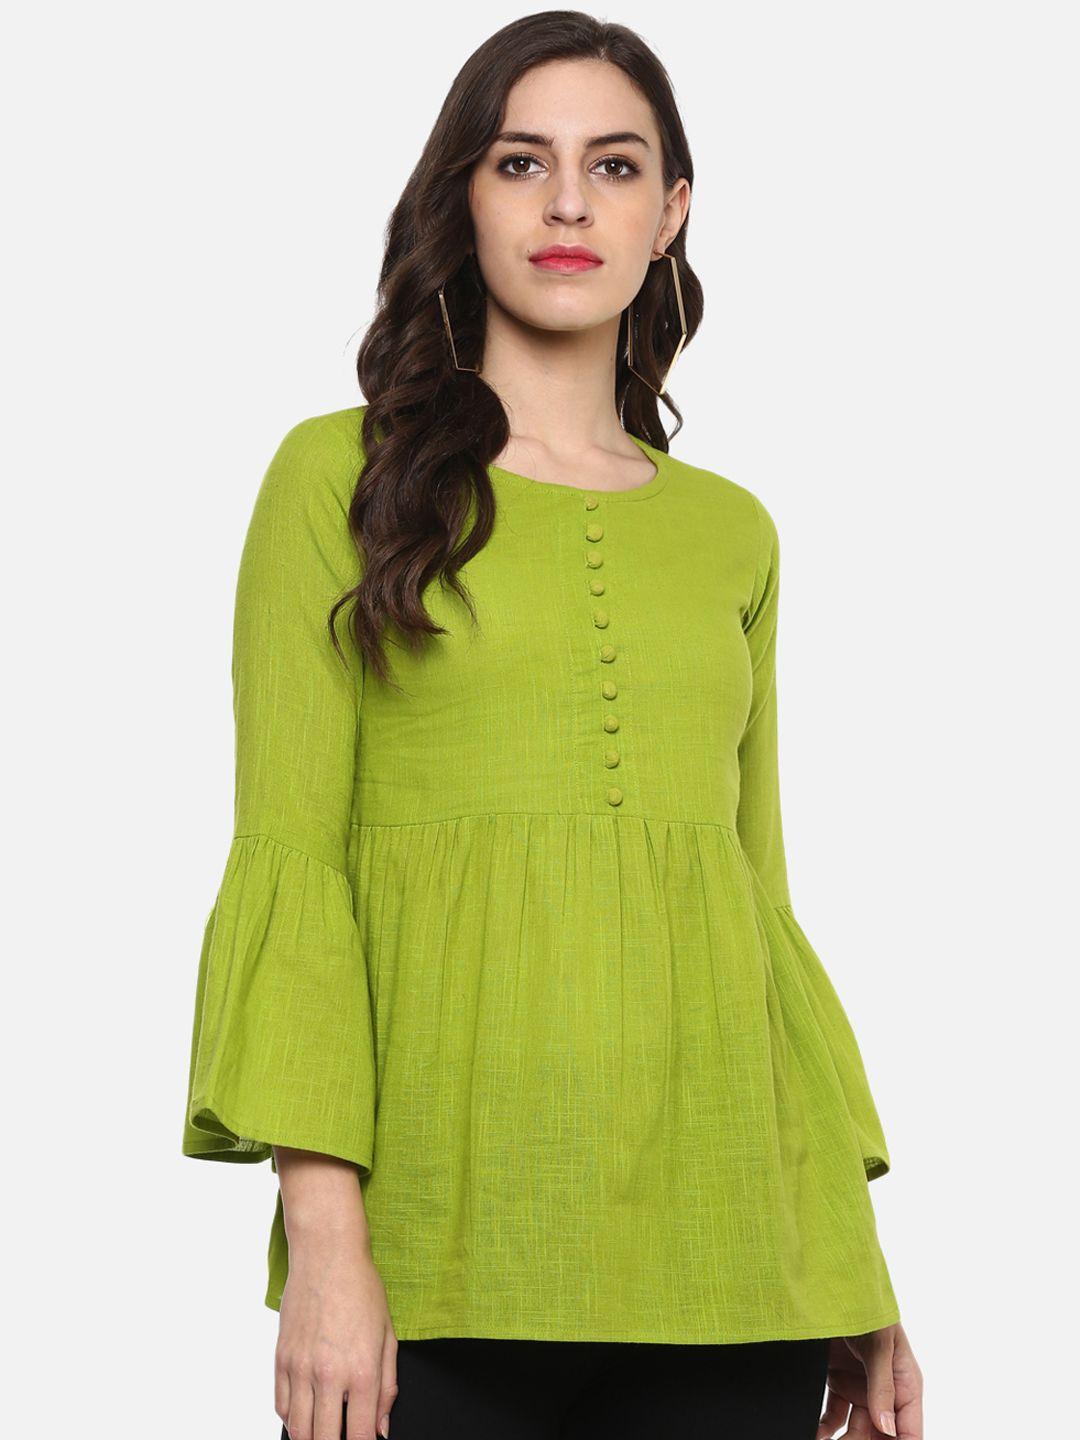 yash gallery women green solid empire top